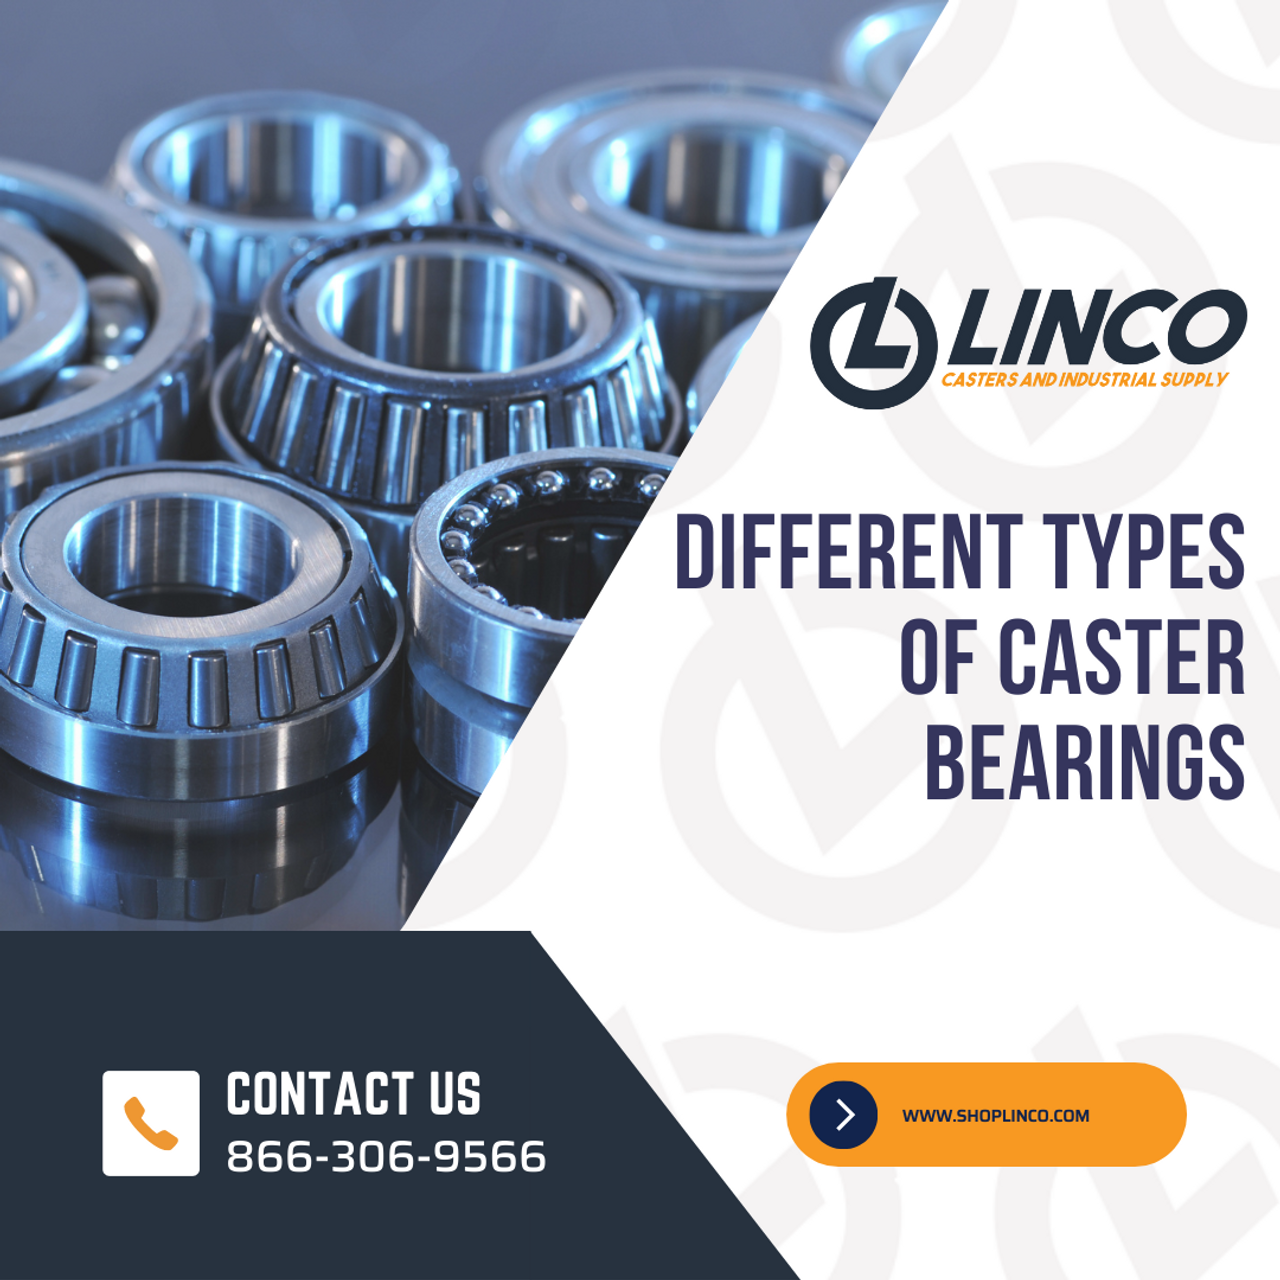 Types of Caster Bearings